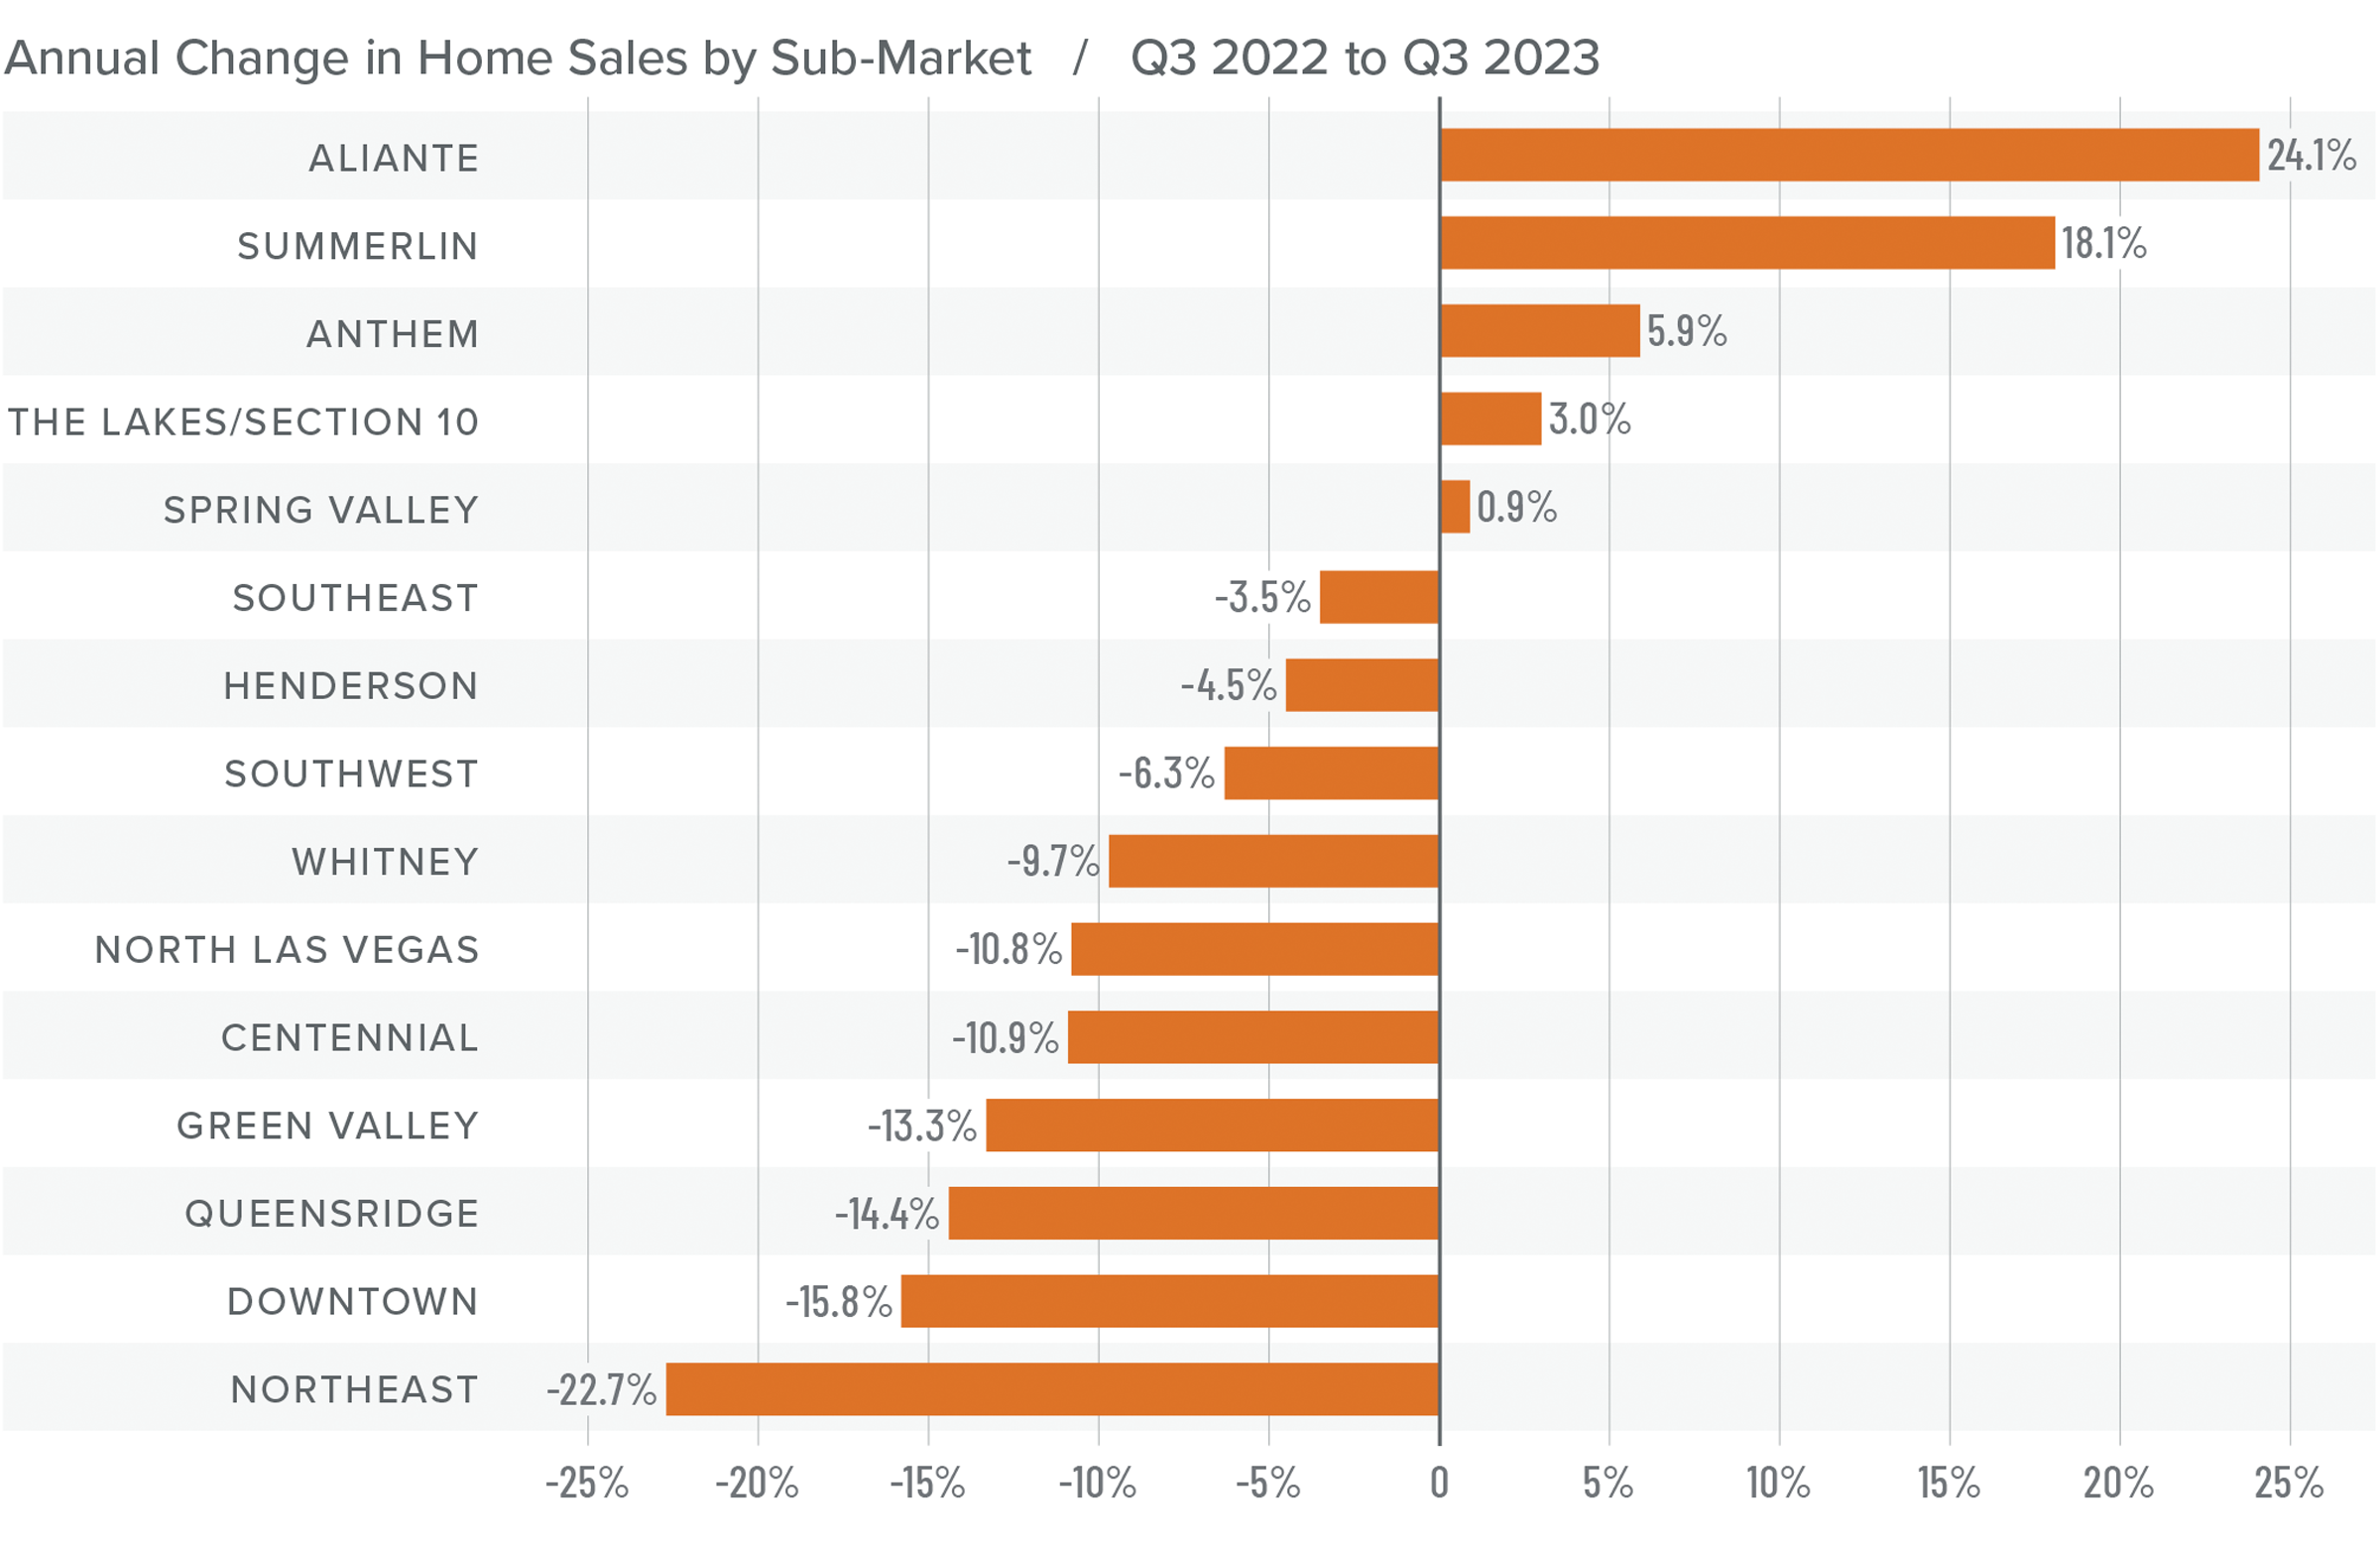 A bar graph showing the annual change in home sales by sub-market in Nevada from Q3 2022 to Q3 2023. Spring Valley had the least change with 0.9% increase and is represented with the bar 5th from the top. Aliante had the greatest increase of 24.1% and Northeast had the greatest decrease of 22.7 percent.